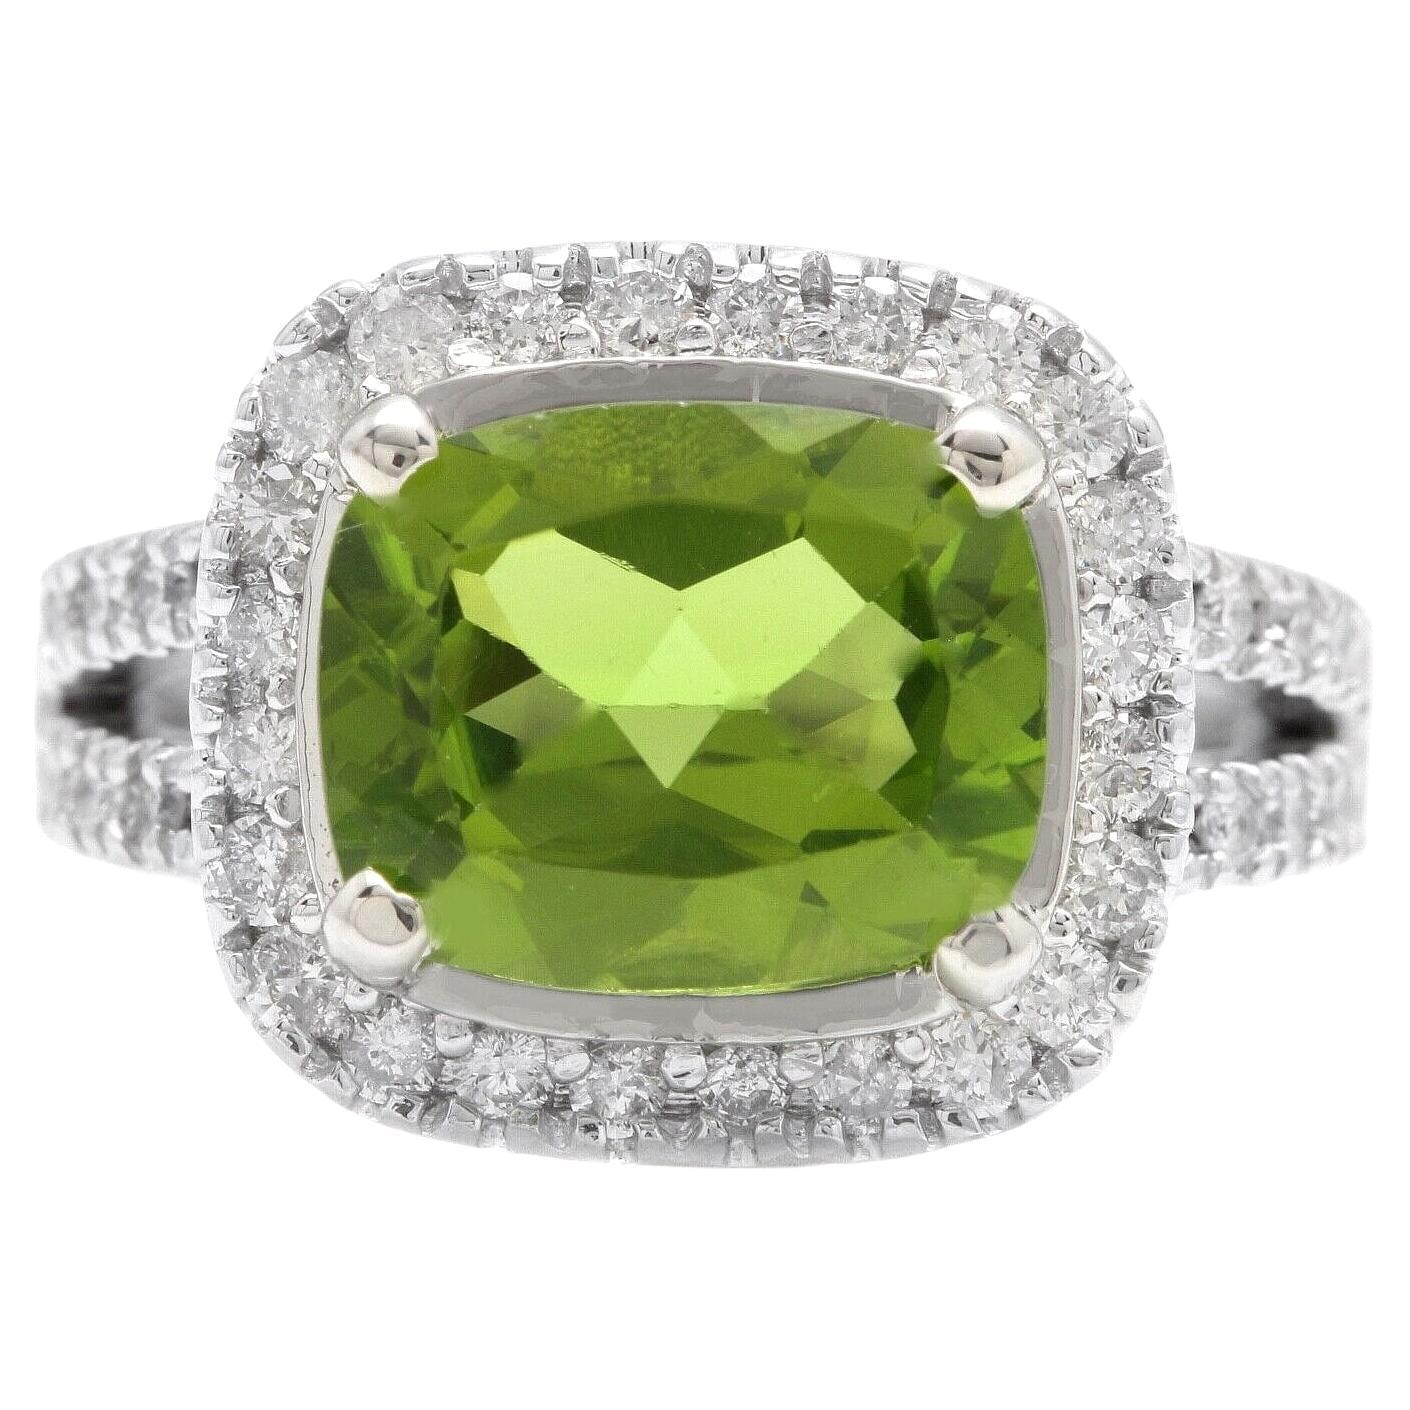 5.30 Carats Natural Very Nice Looking Peridot and Diamond 14k Solid White Gold